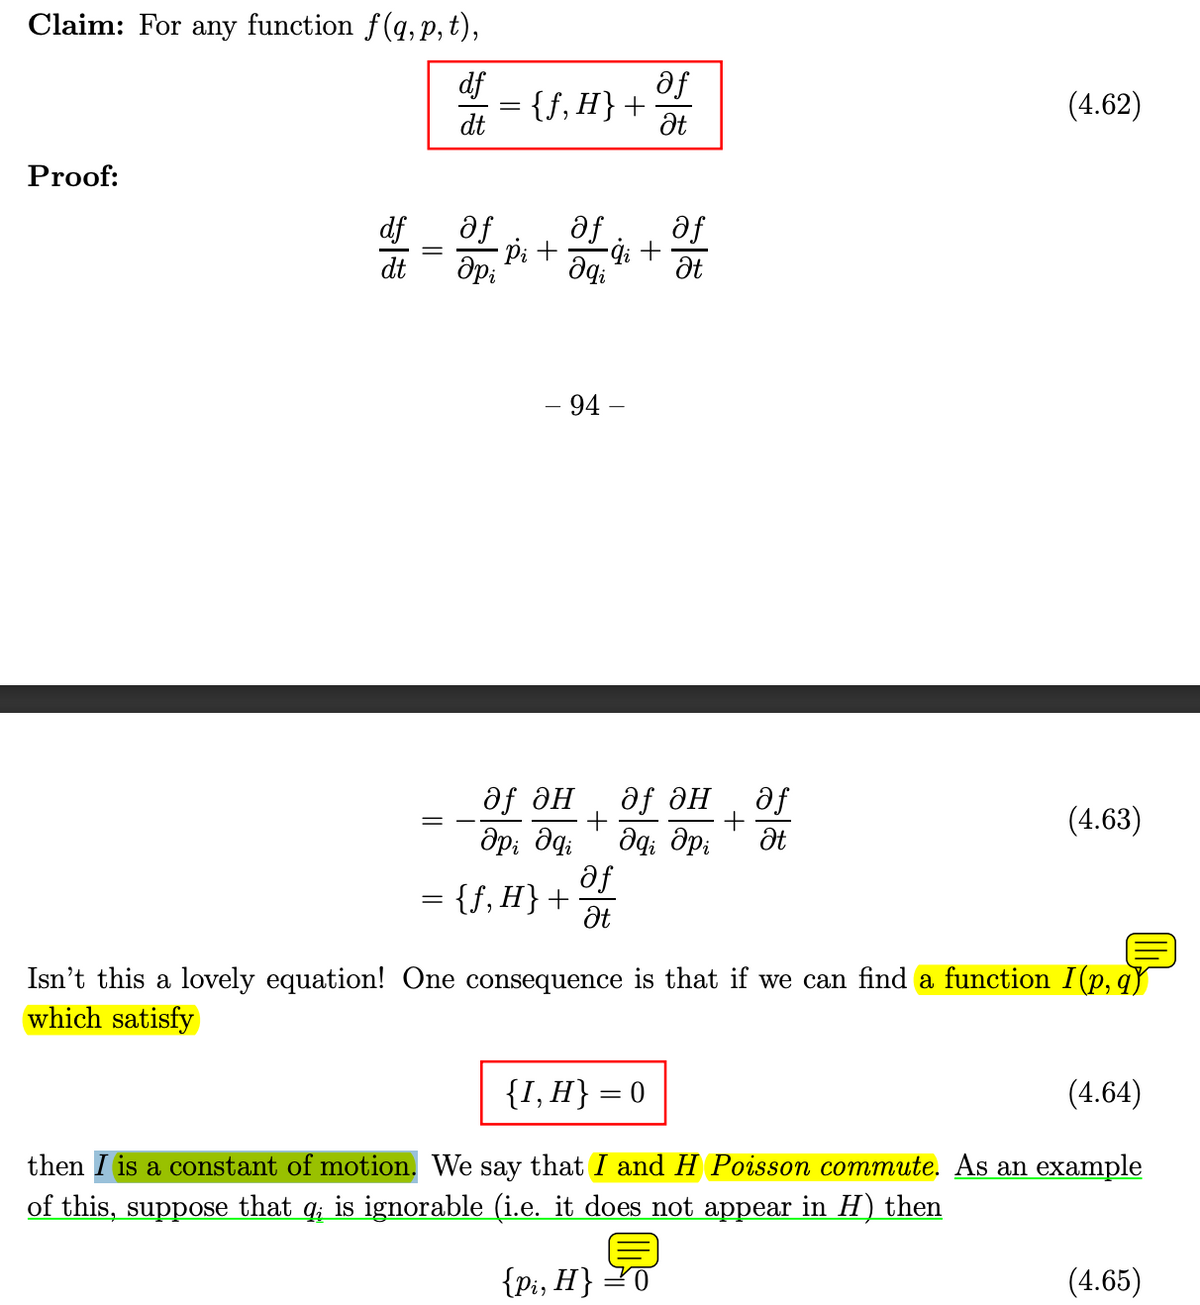 Claim: For any function f(q, p,t),
Proof:
df
af
{f, H} +
(4.62)
dt
Ət
df
dt
=
af
дрі
af
af
·Pi +
-ġi +
Əqi
Ət
- 94 -
дf дн
дf ән
=
+
მp; მq; да дрі
af
= {ƒ,H} +
Ət
+
55
af
(4.63)
Ət
Isn't this a lovely equation! One consequence is that if we can find a function I (p,q)
which satisfy
{I, H} = 0
(4.64)
then I is a constant of motion. We say that I and H Poisson commute. As an example
of this, suppose that q; is ignorable (i.e. it does not appear in H) then
{pi, H}
(4.65)